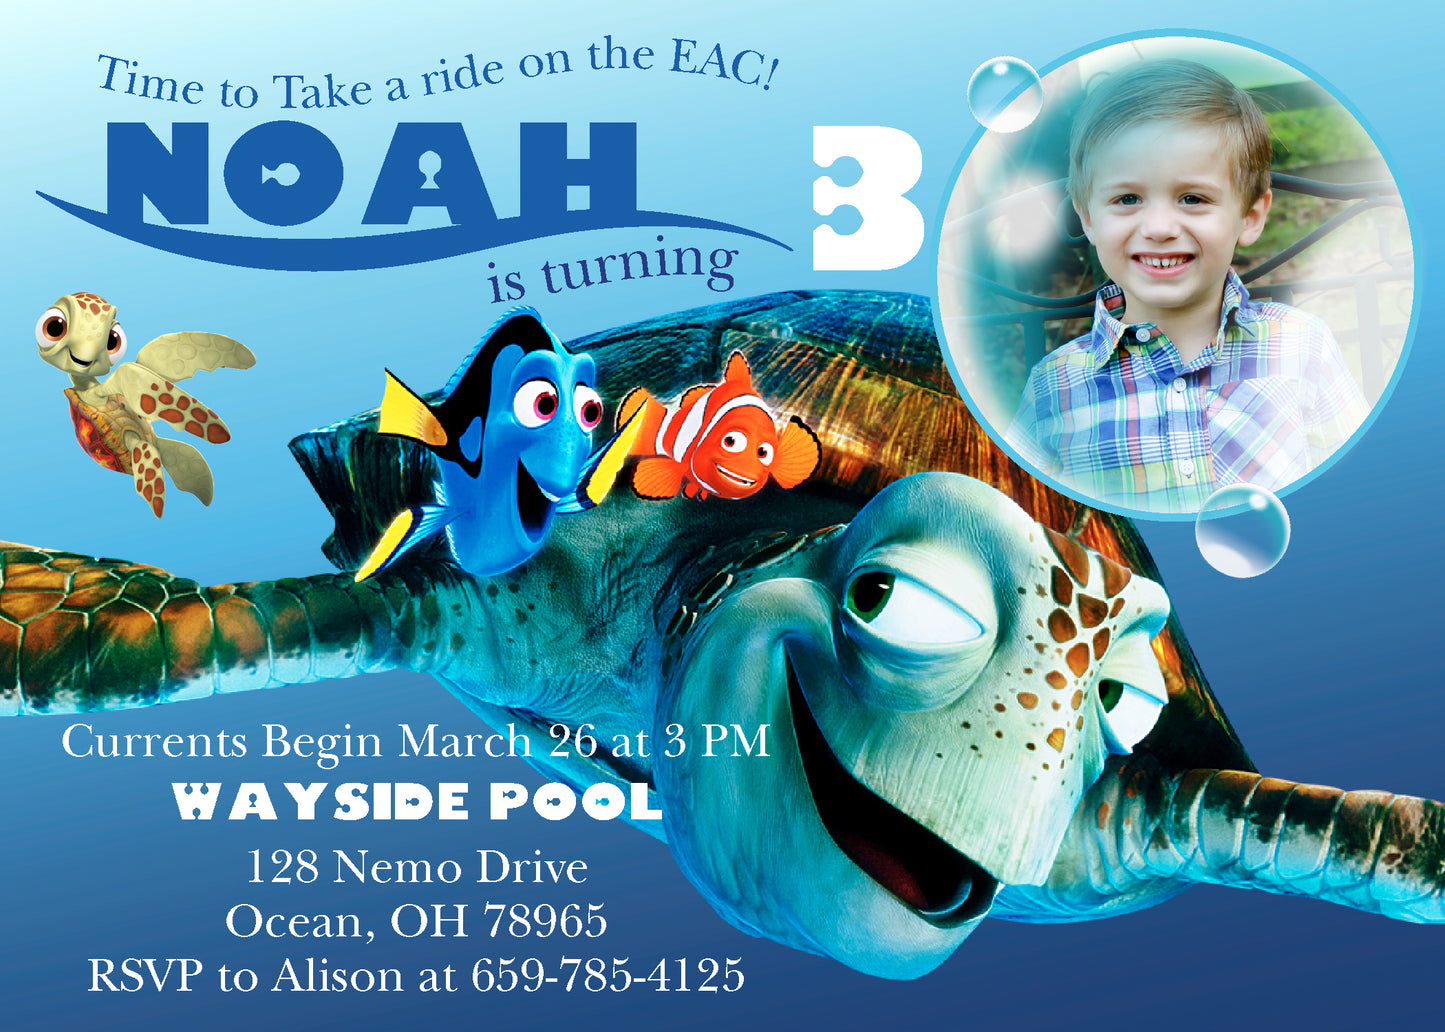 Finding Nemo Birthday Party Invitation with Photo! Nemo, Dory, Squirt, Crush! Printed or Digital!